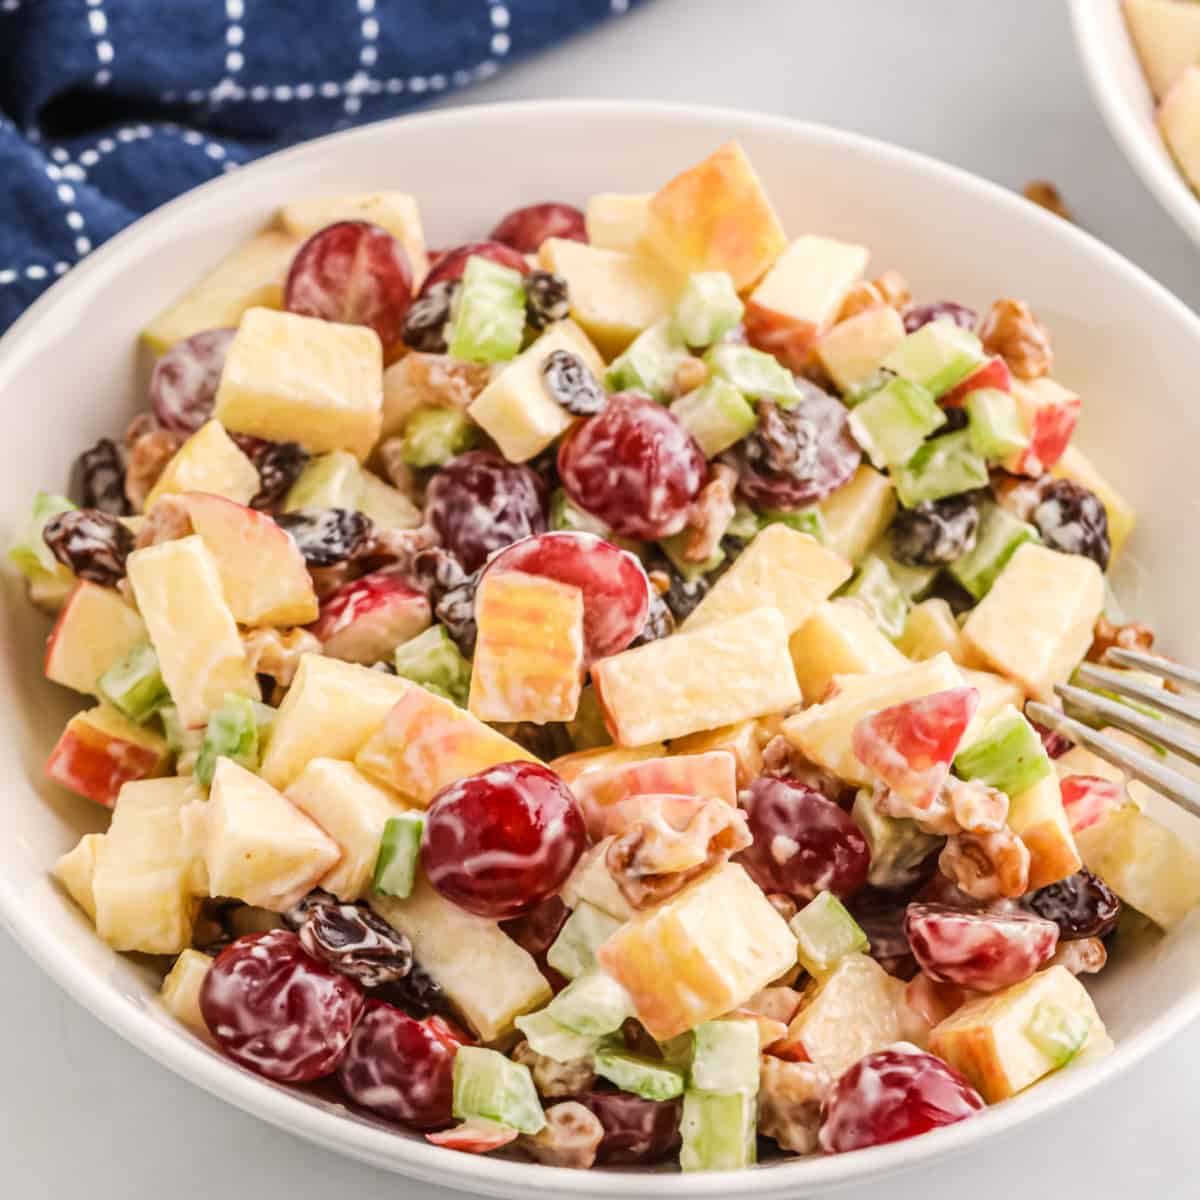 The Best Waldorf Salad Recipe - All Things Mamma